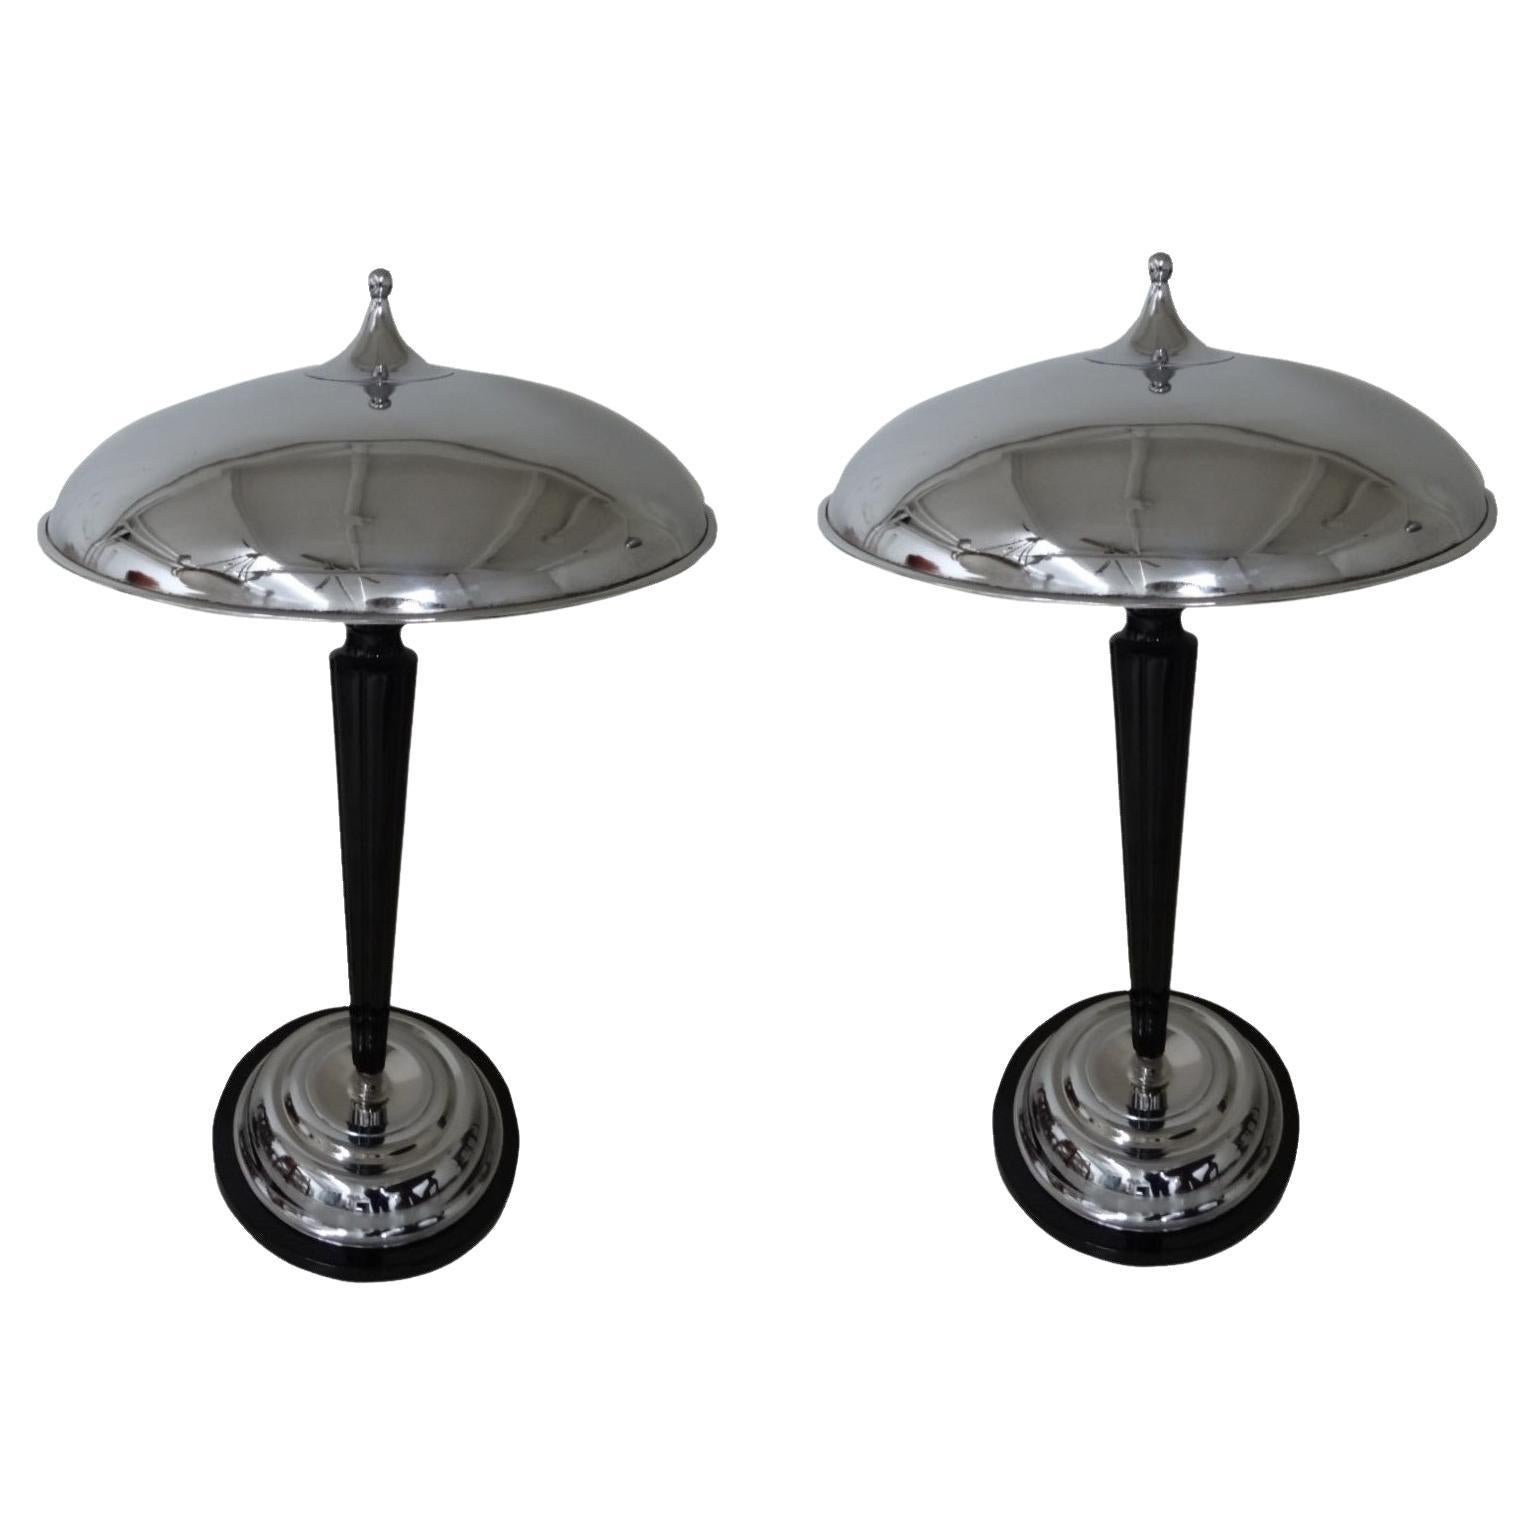 Big Pair of Art Deco Lamps in wood and chrome, 1930, France For Sale